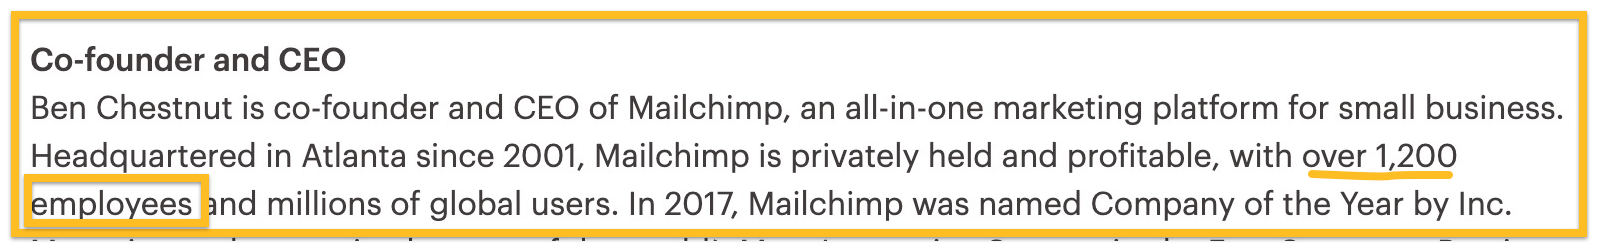 Mailchimp is a huge company with more than 1200 employees